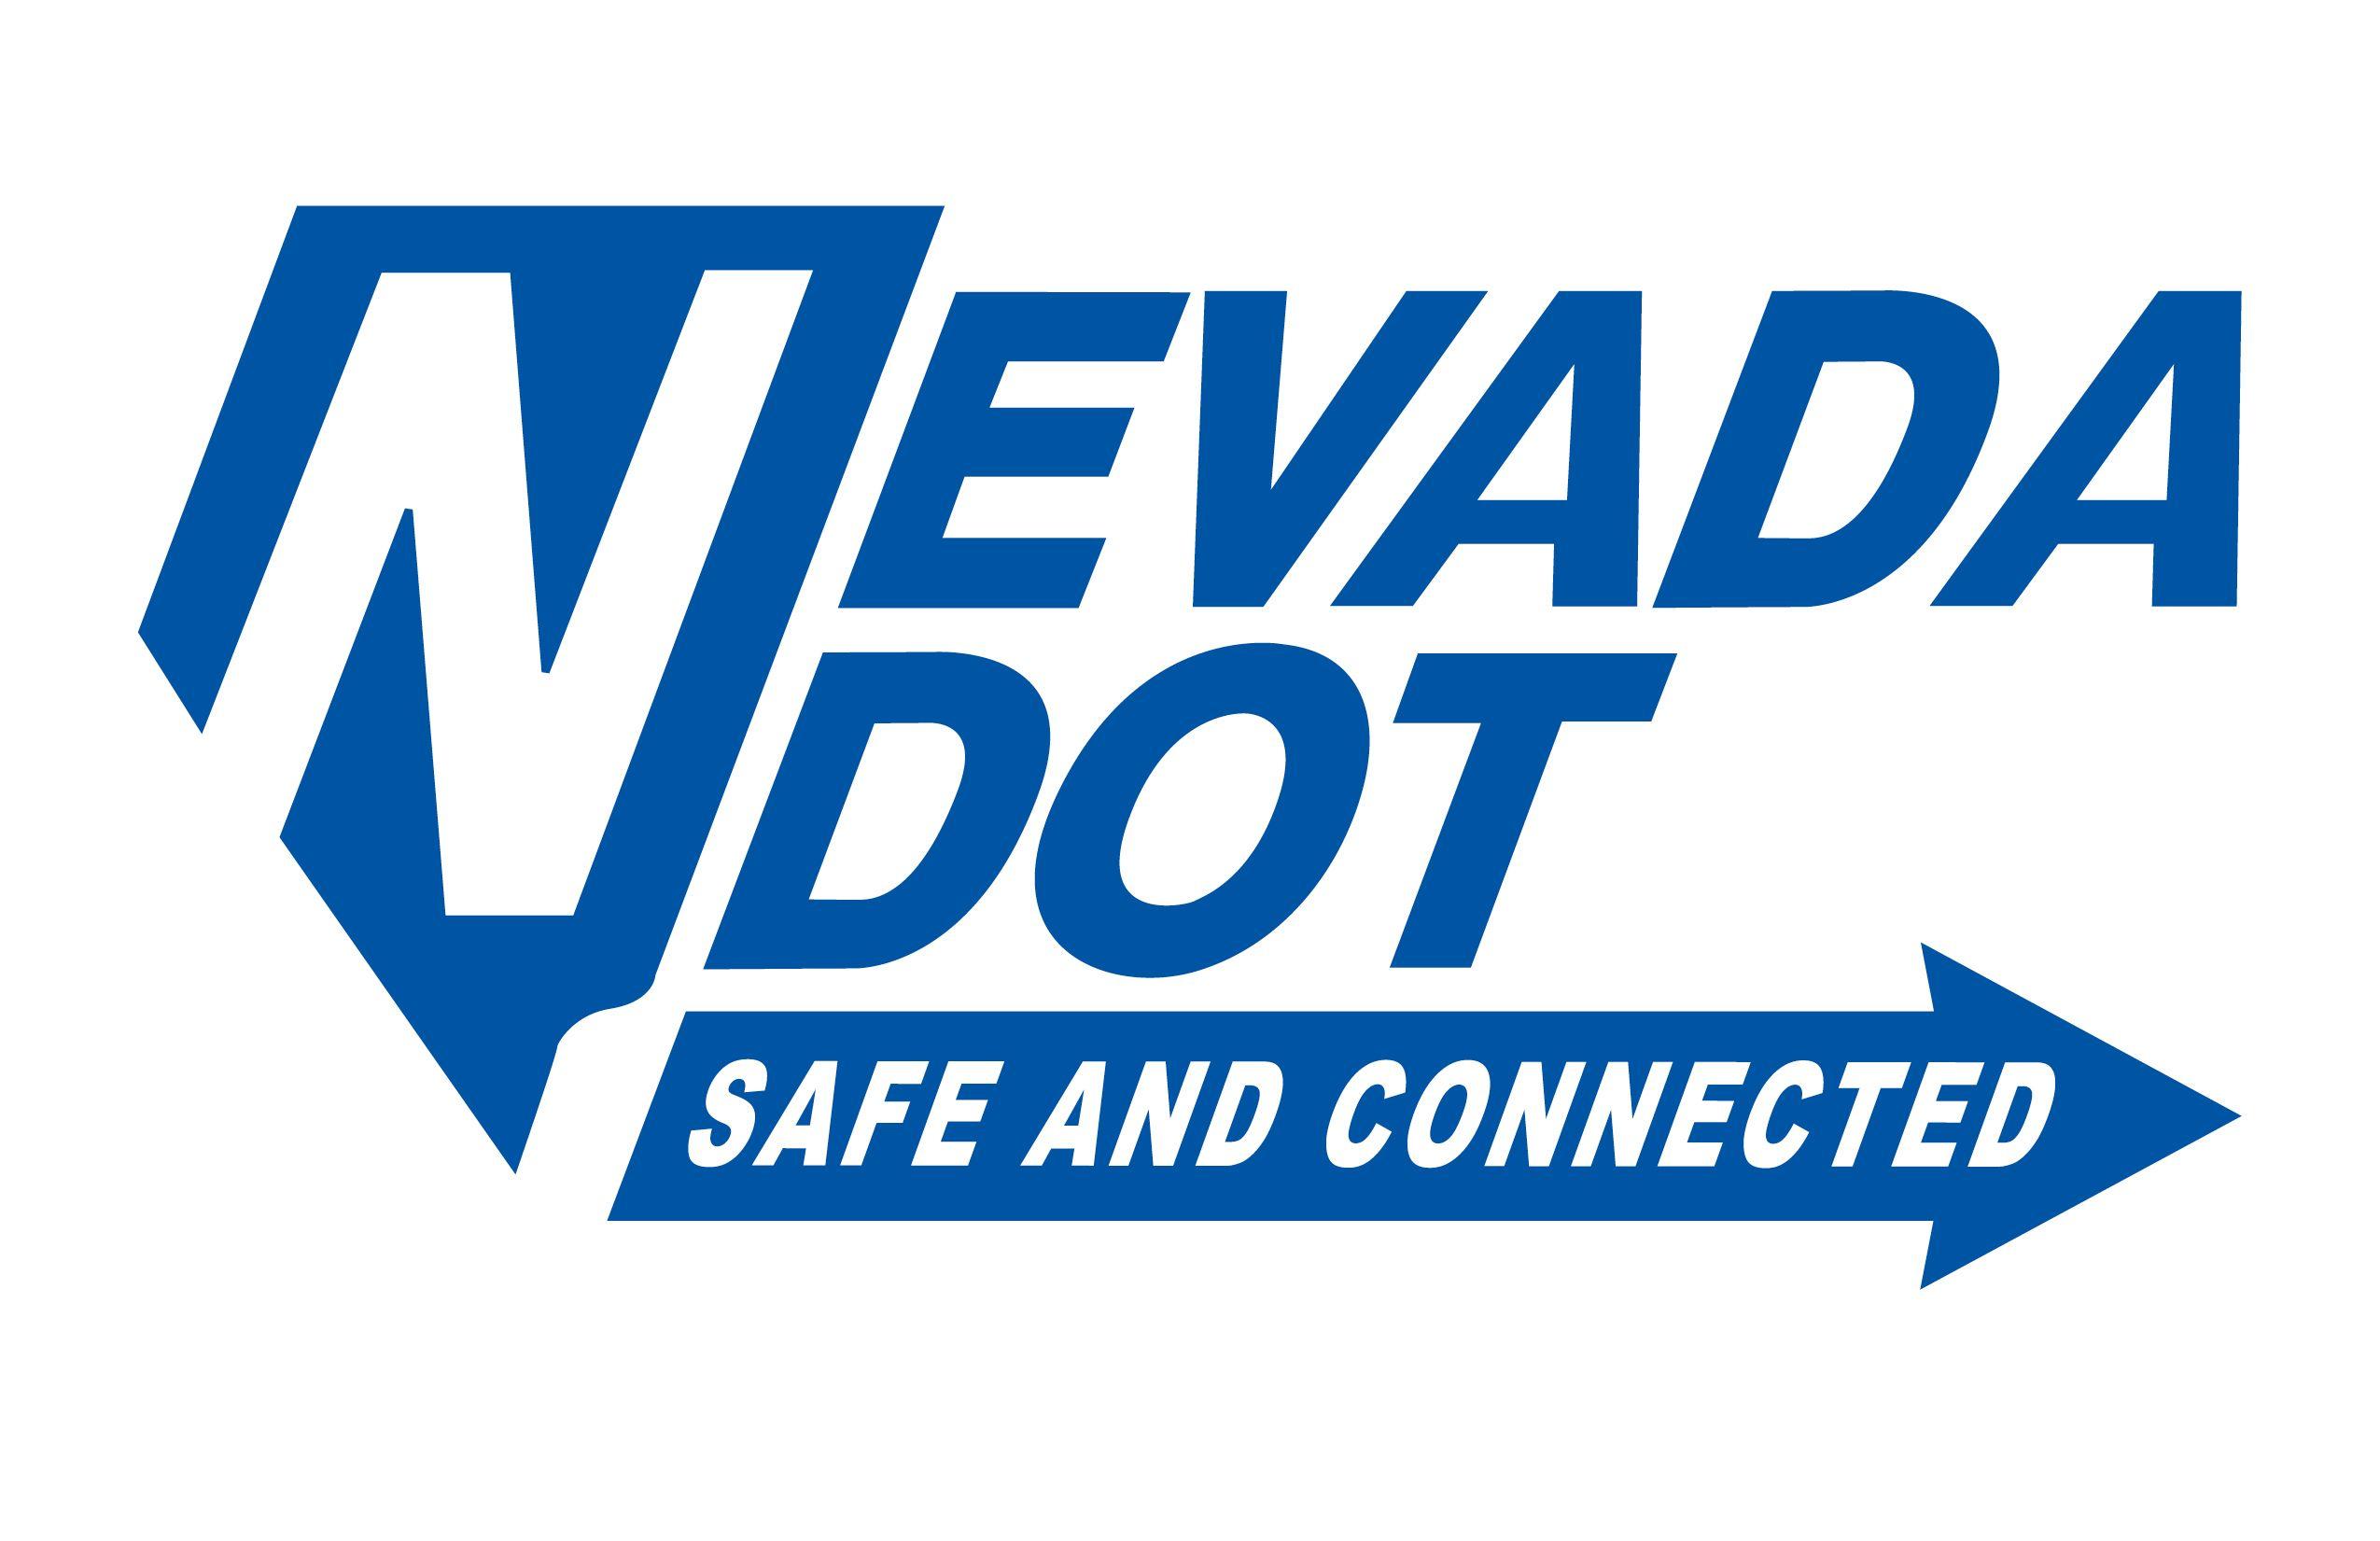 Nevada Dot Logo - Nevada Department of Transportation Launches New Brand and Logo ...